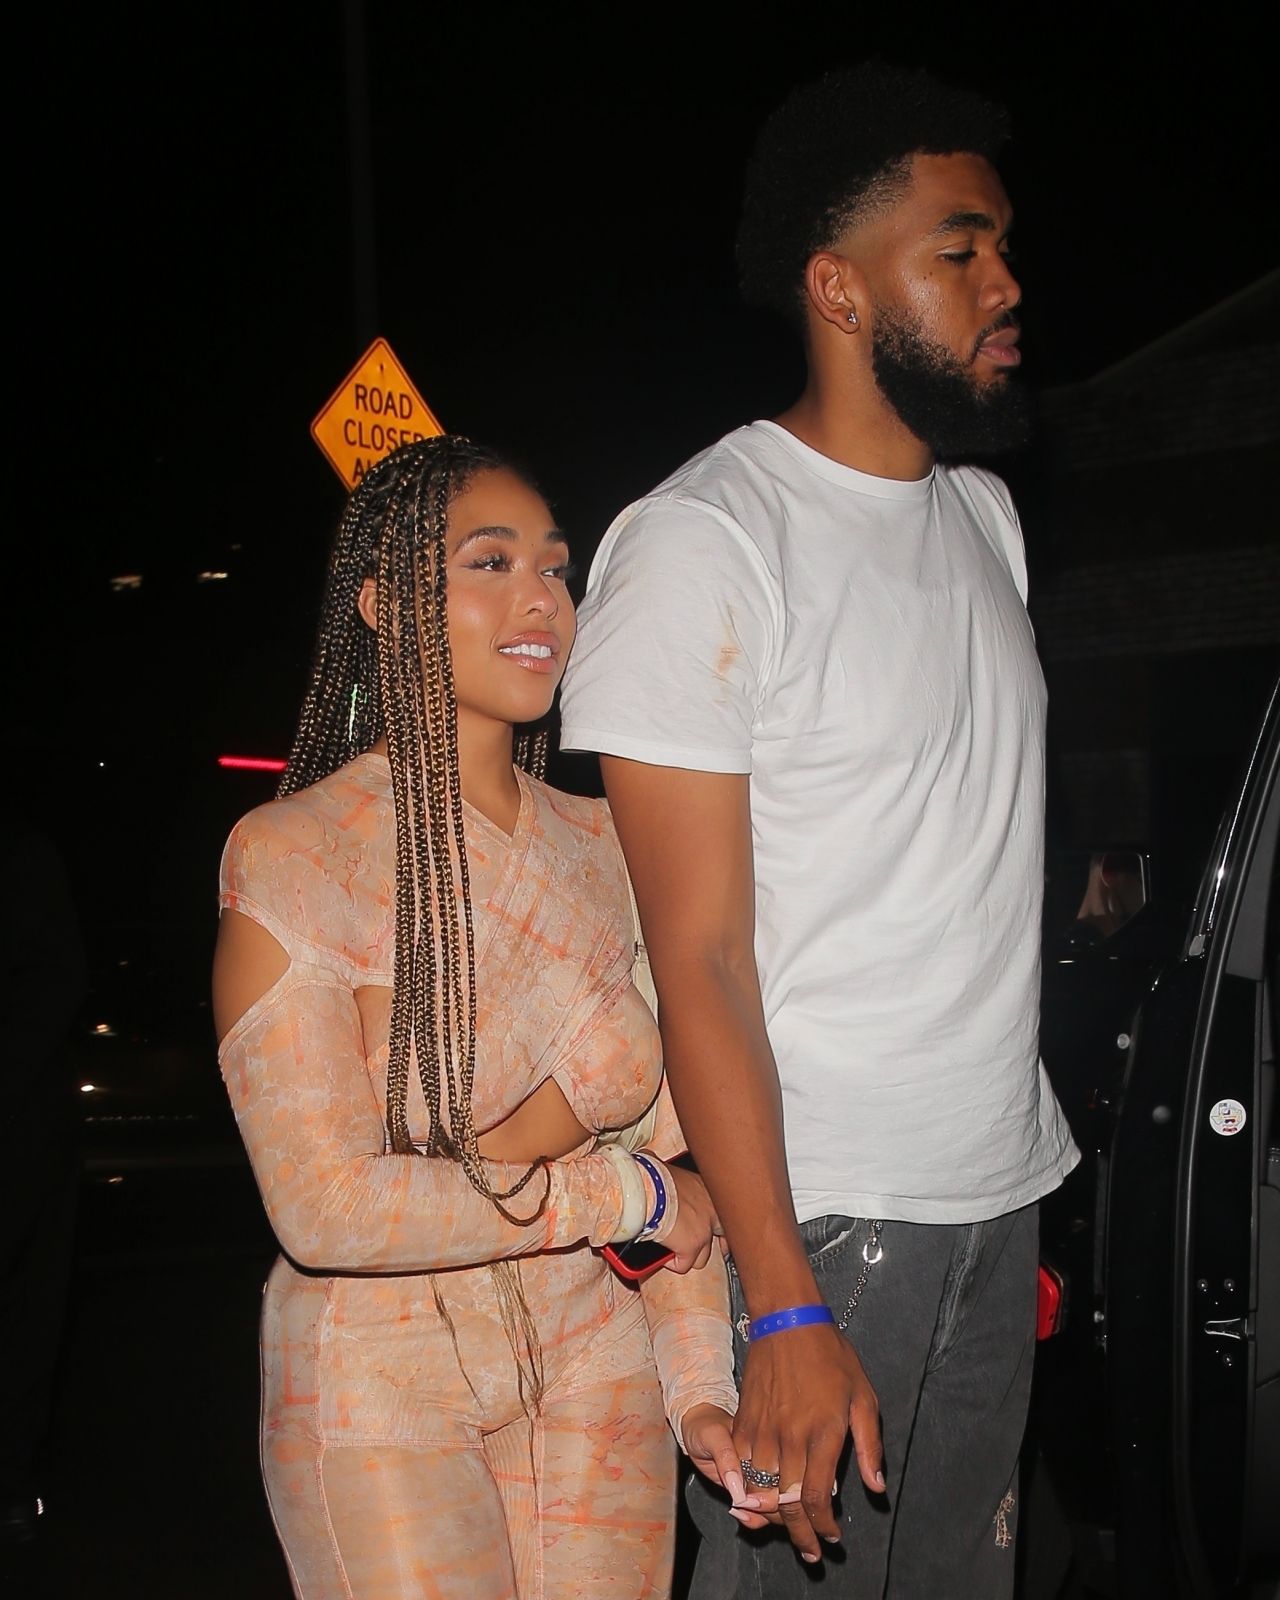 Jordyn Woods And Karl Anthony Towns At The Highlight Room In LA 06 30